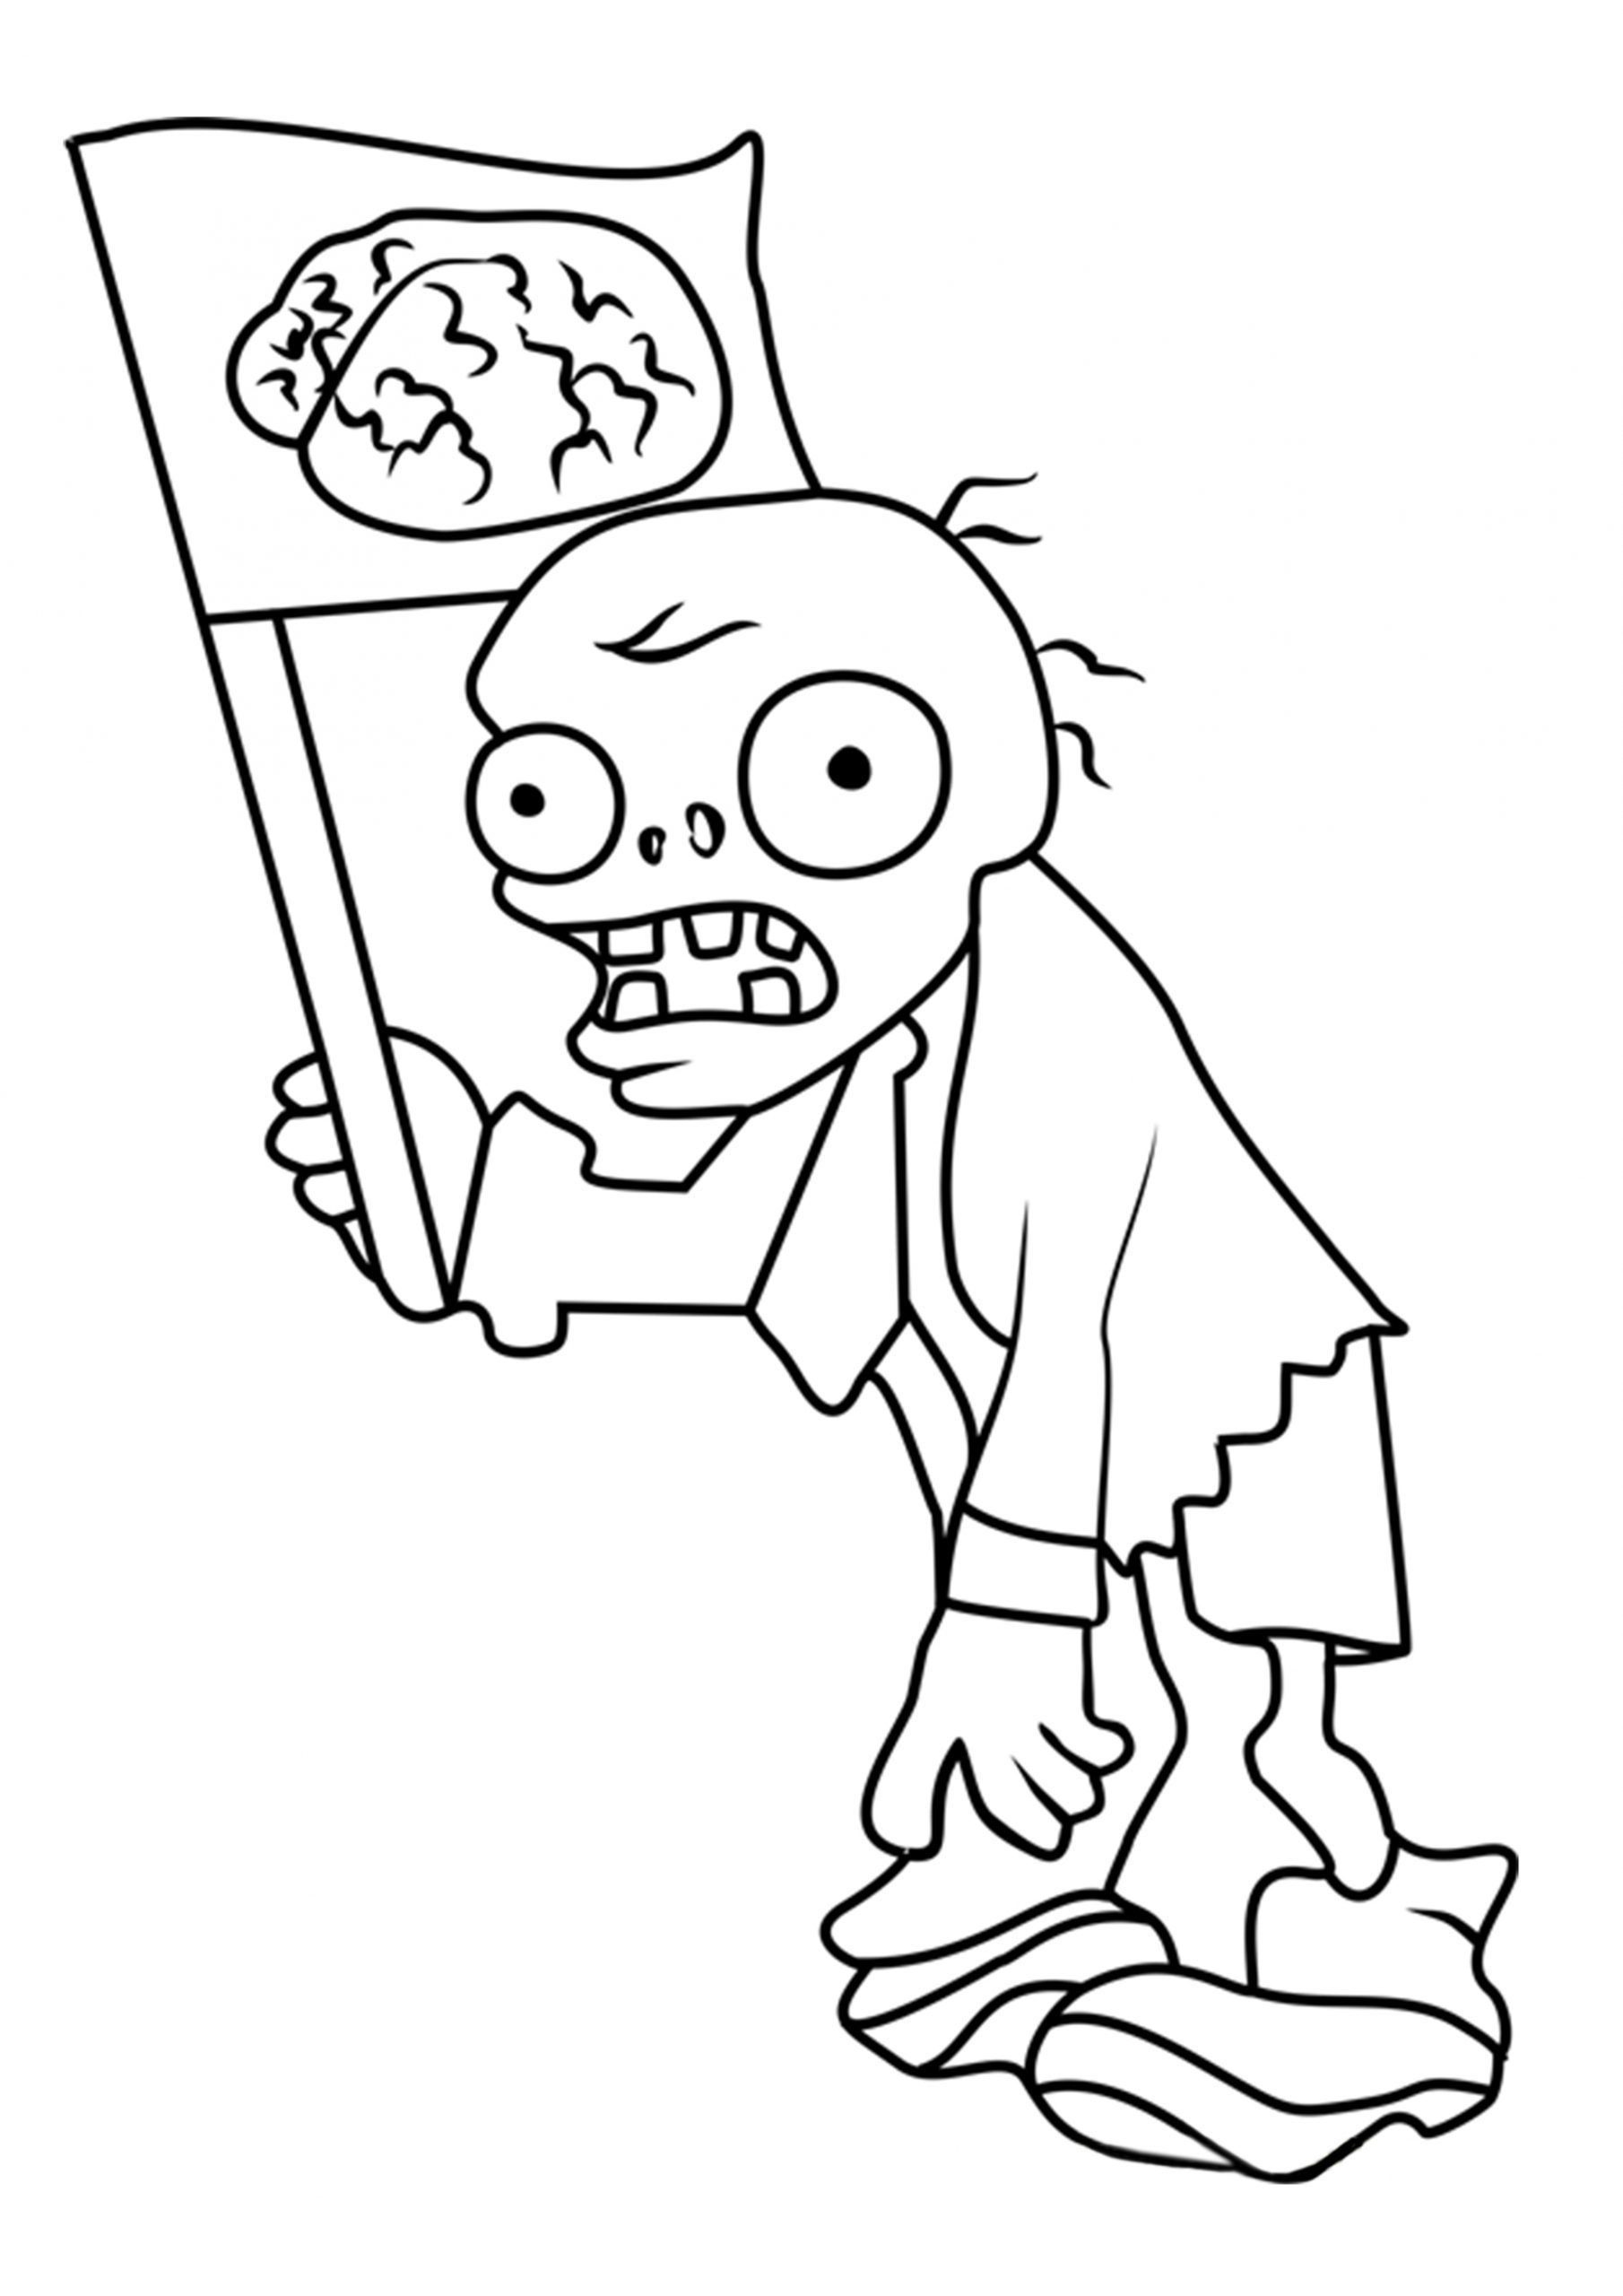 plants vs zombies zombie coloring pages